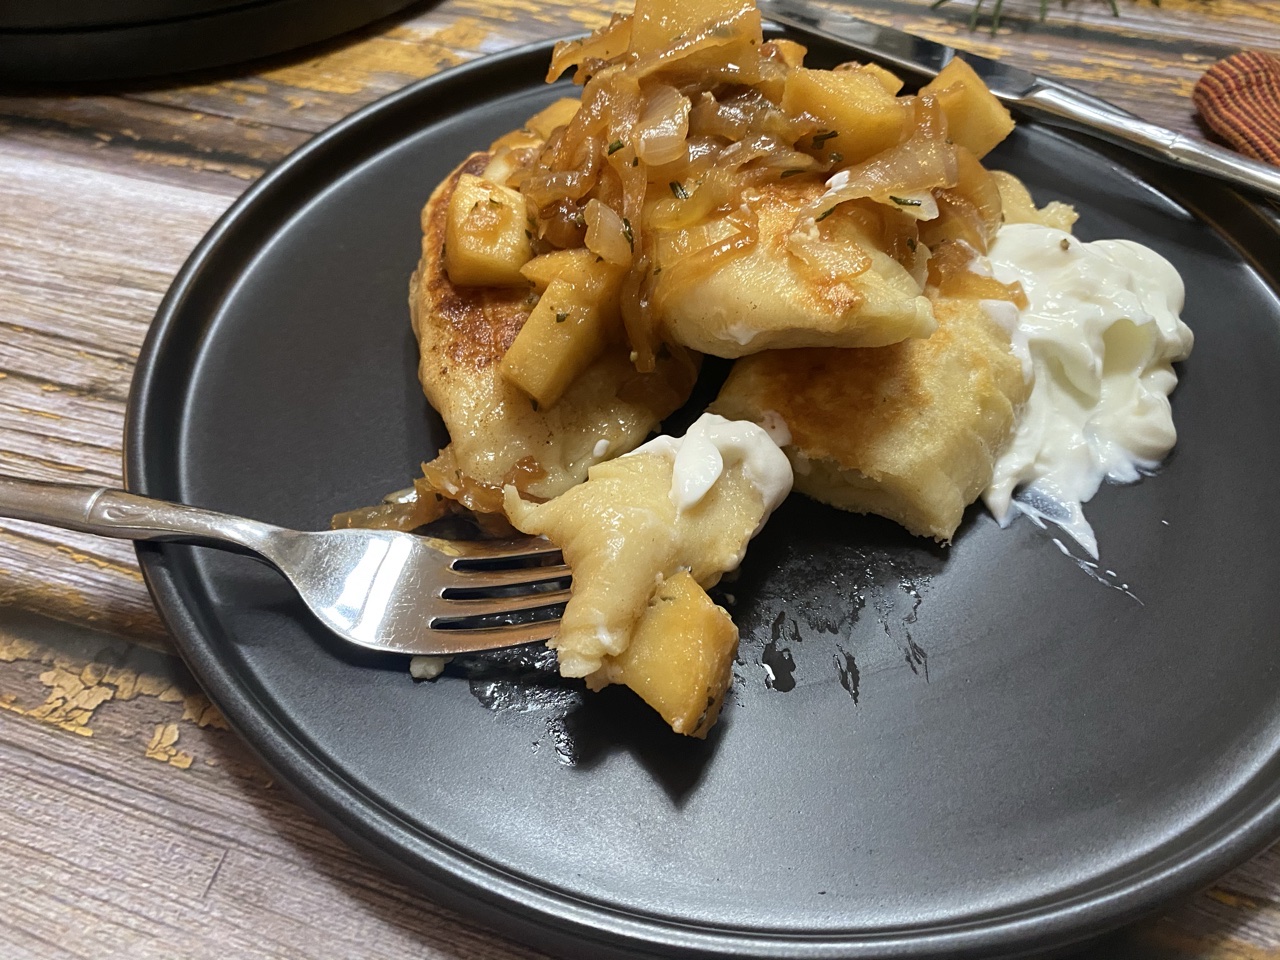 2B70B370 748F 44E8 B752 DC1B6FA6B9CE - Three Cheese Pierogies with Cider Caramelized Onions & Apples